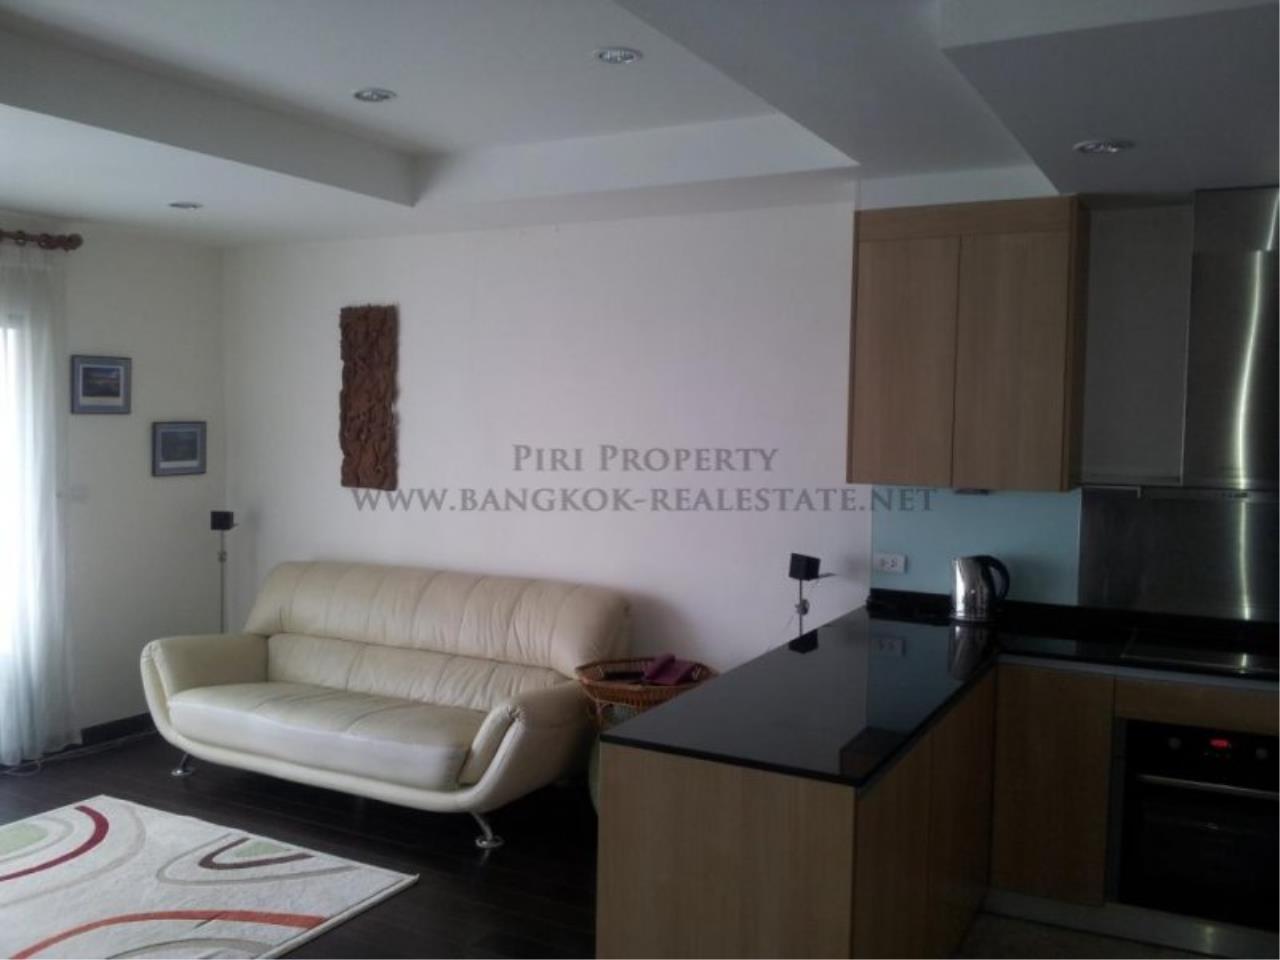 Piri Property Agency's 2 Bedroom Condo for Sale in Sathorn Gardens - 84 SQM on 10th Floor 1